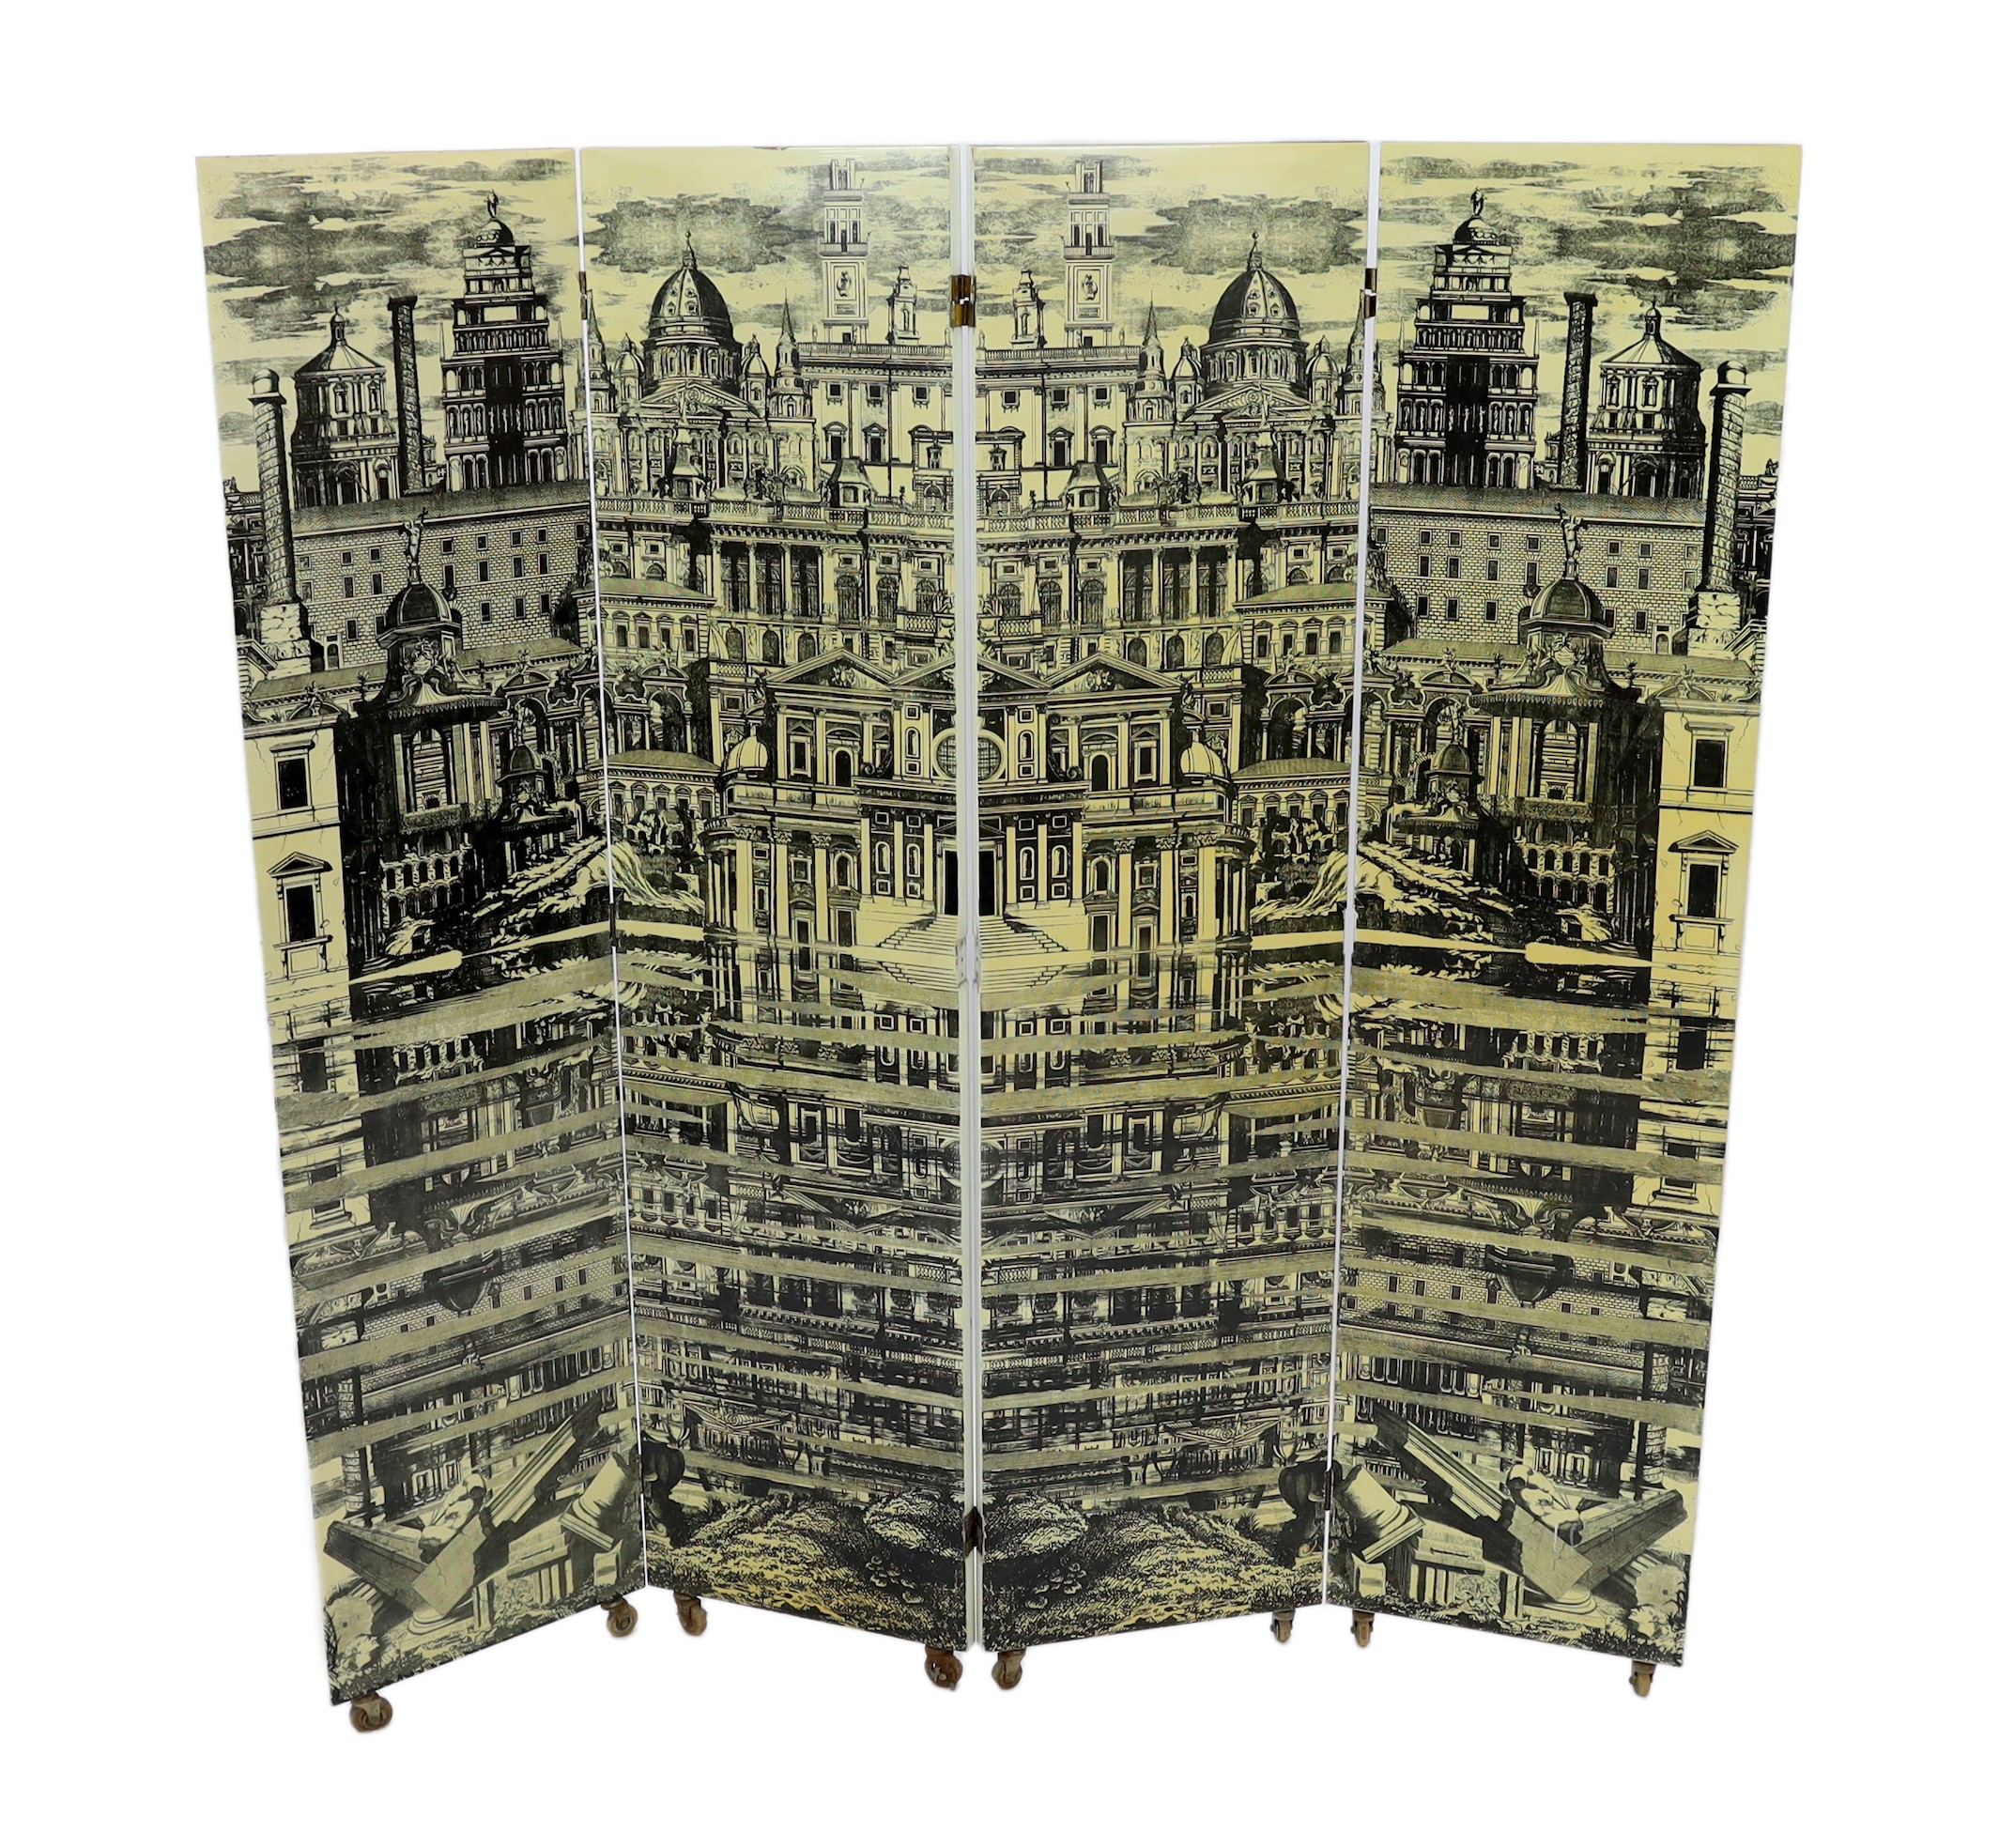 Piero Fornasetti (Italian, 1913-1988) - ‘’Citta Che Si Rispecchia’’ [City that reflects itself] four panel screen width of each section 50cm height without castors 200cm